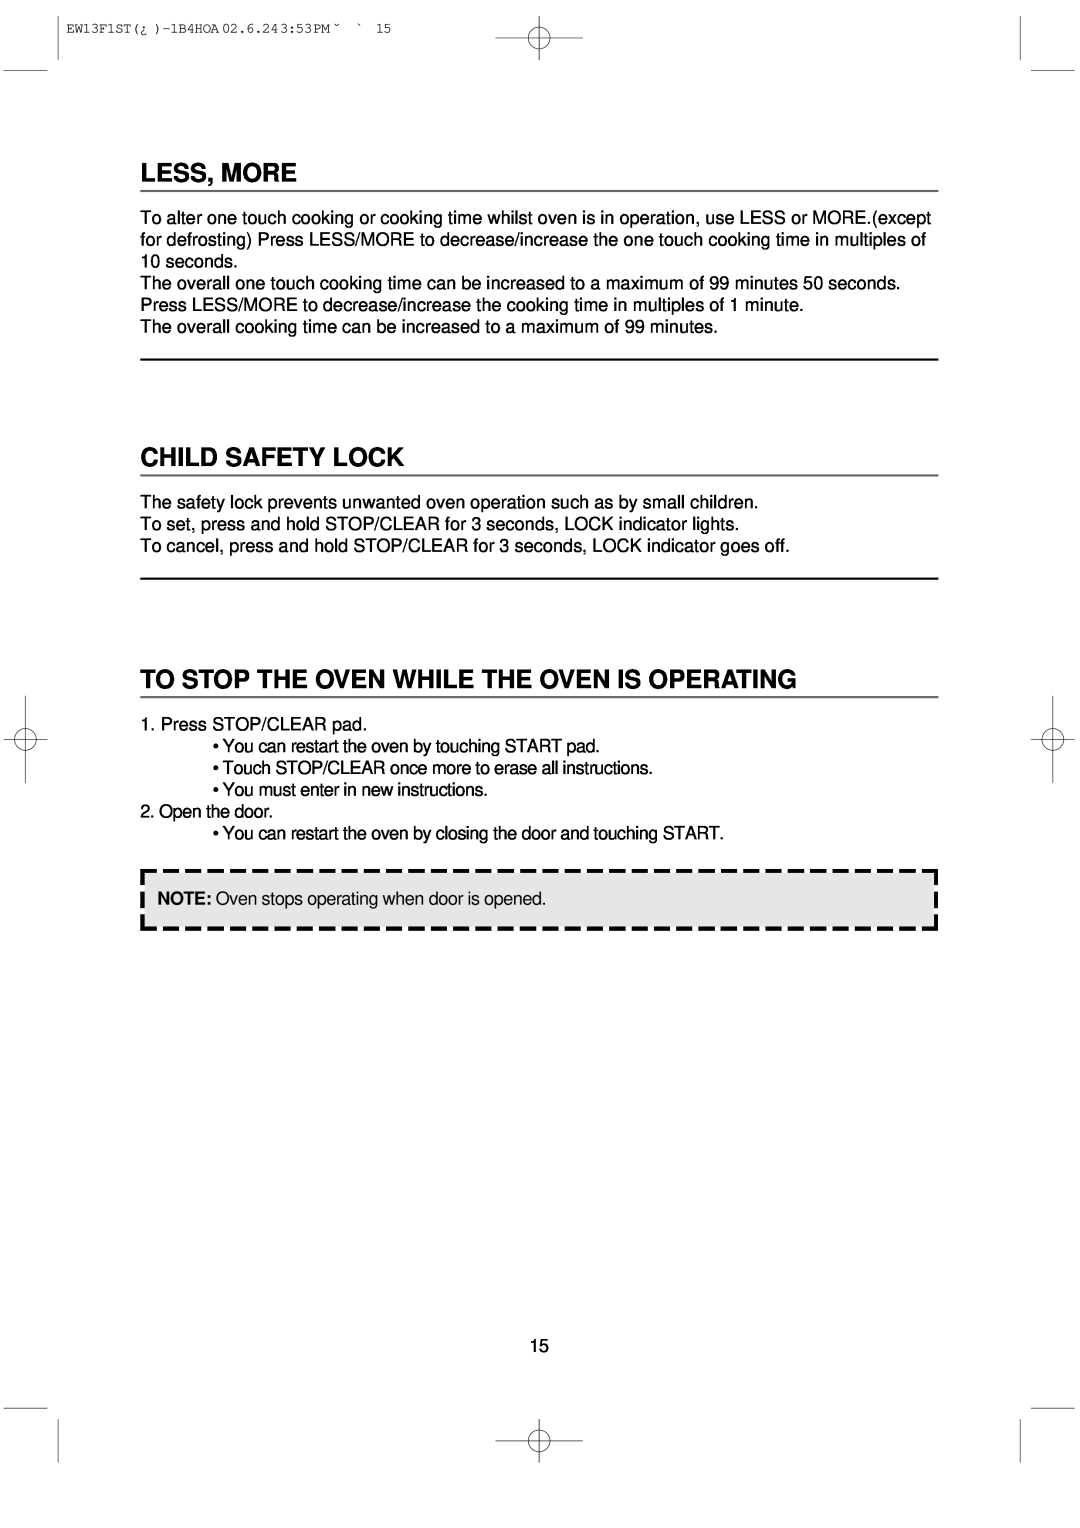 Daewoo EW13F1ST manual Less, More, Child Safety Lock, To Stop The Oven While The Oven Is Operating 